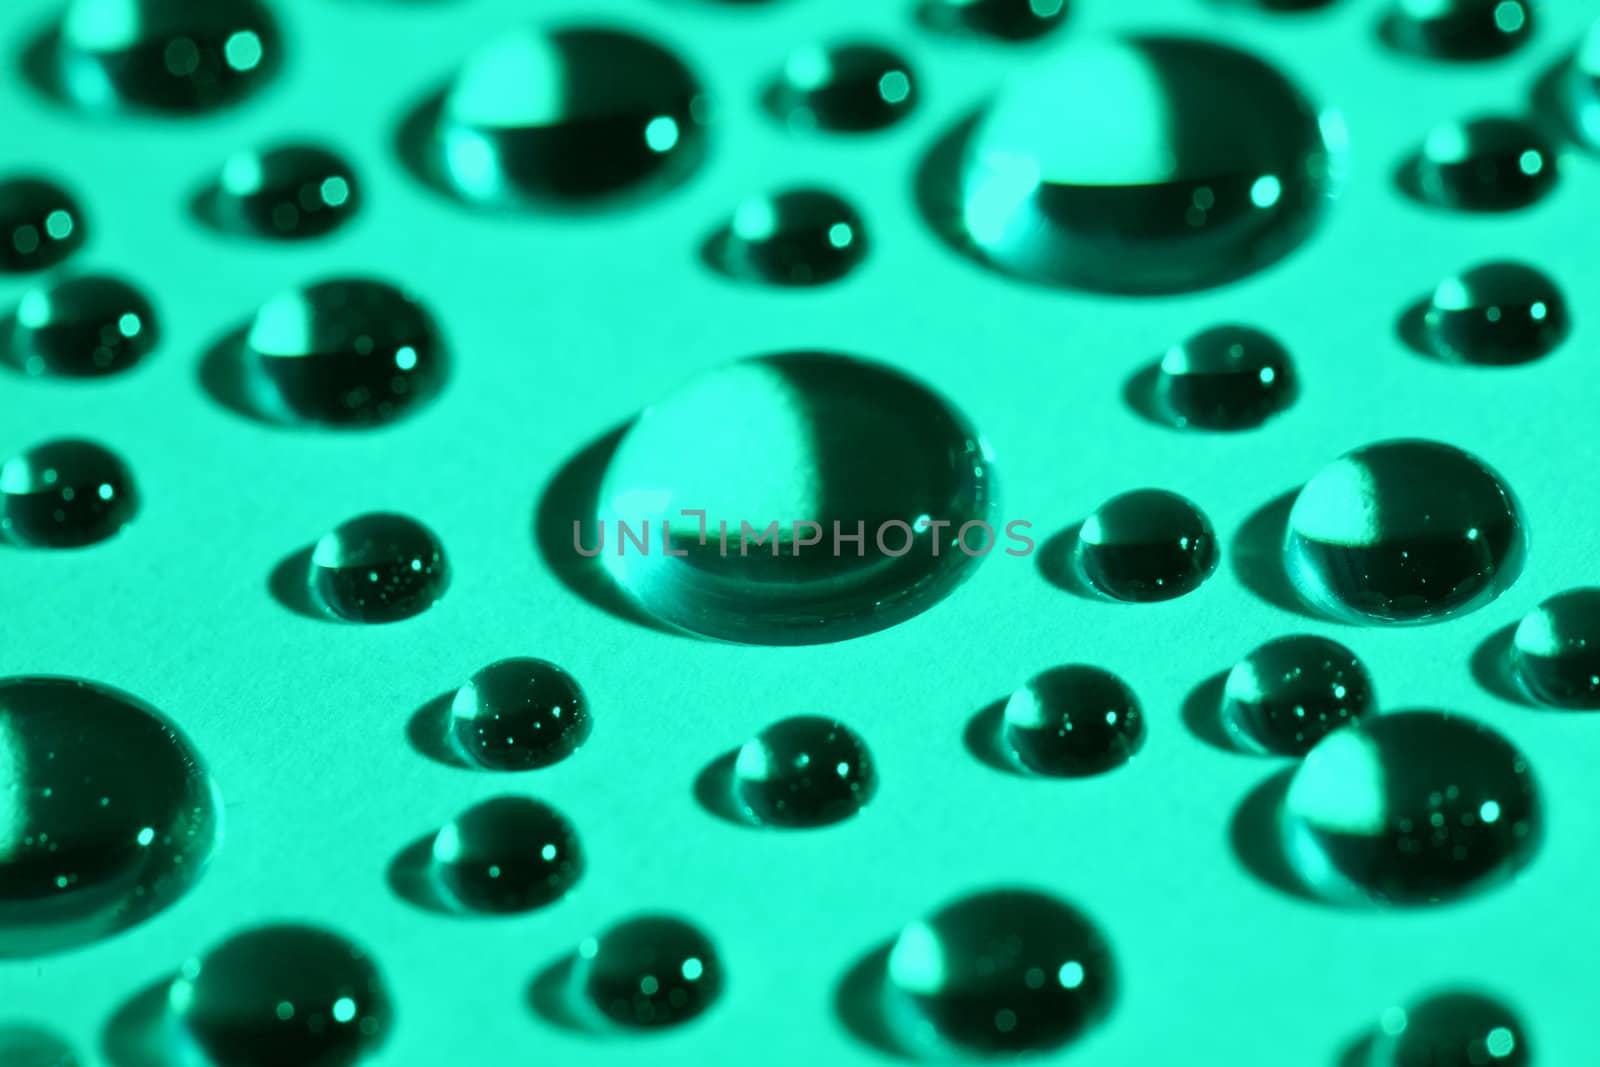 Abstract background with water drops on green glass